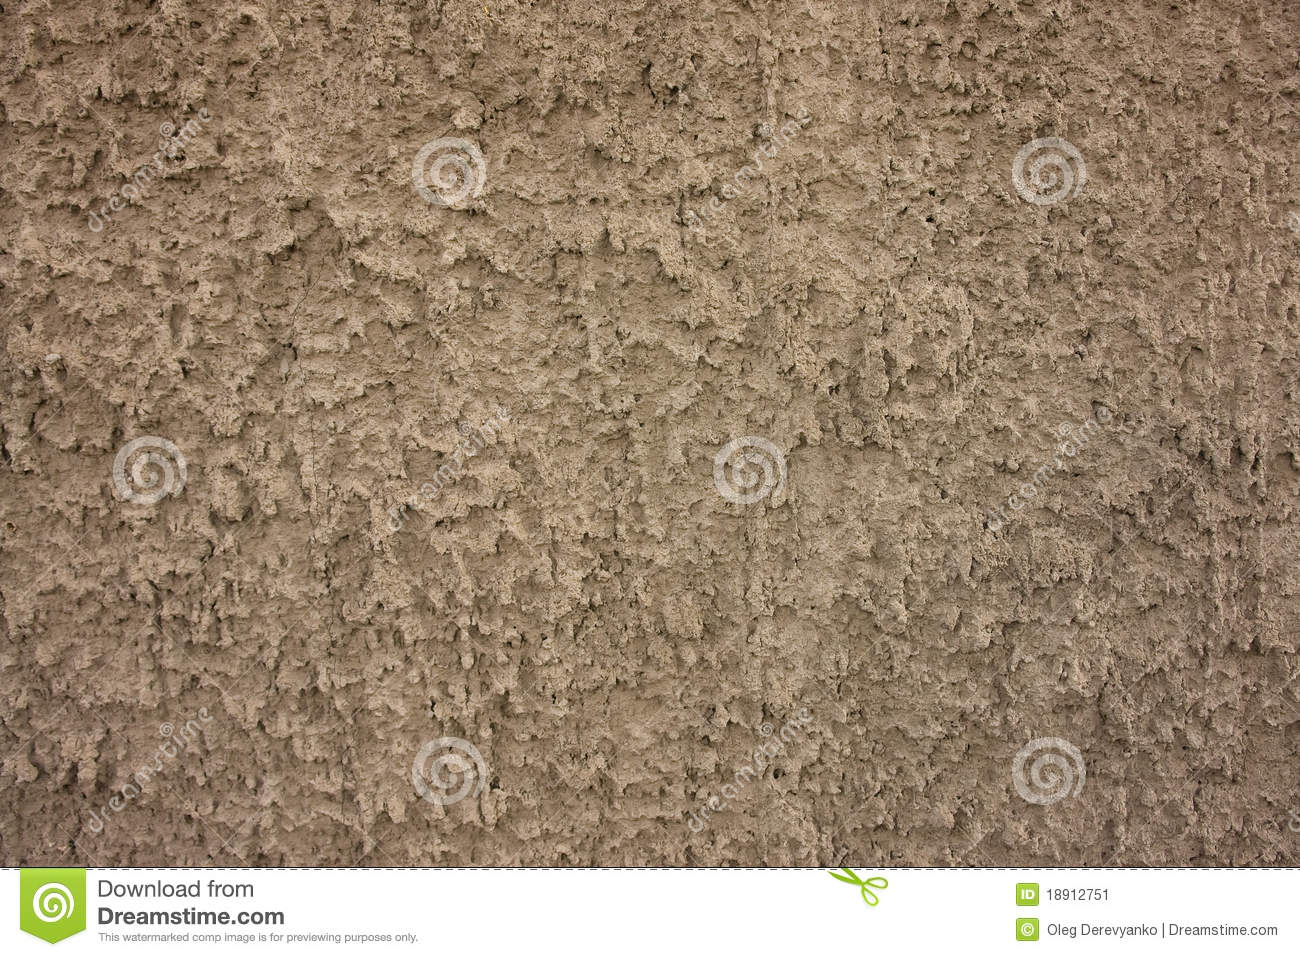 Plaster On The Wall 2 Stock Image   Image  18912751